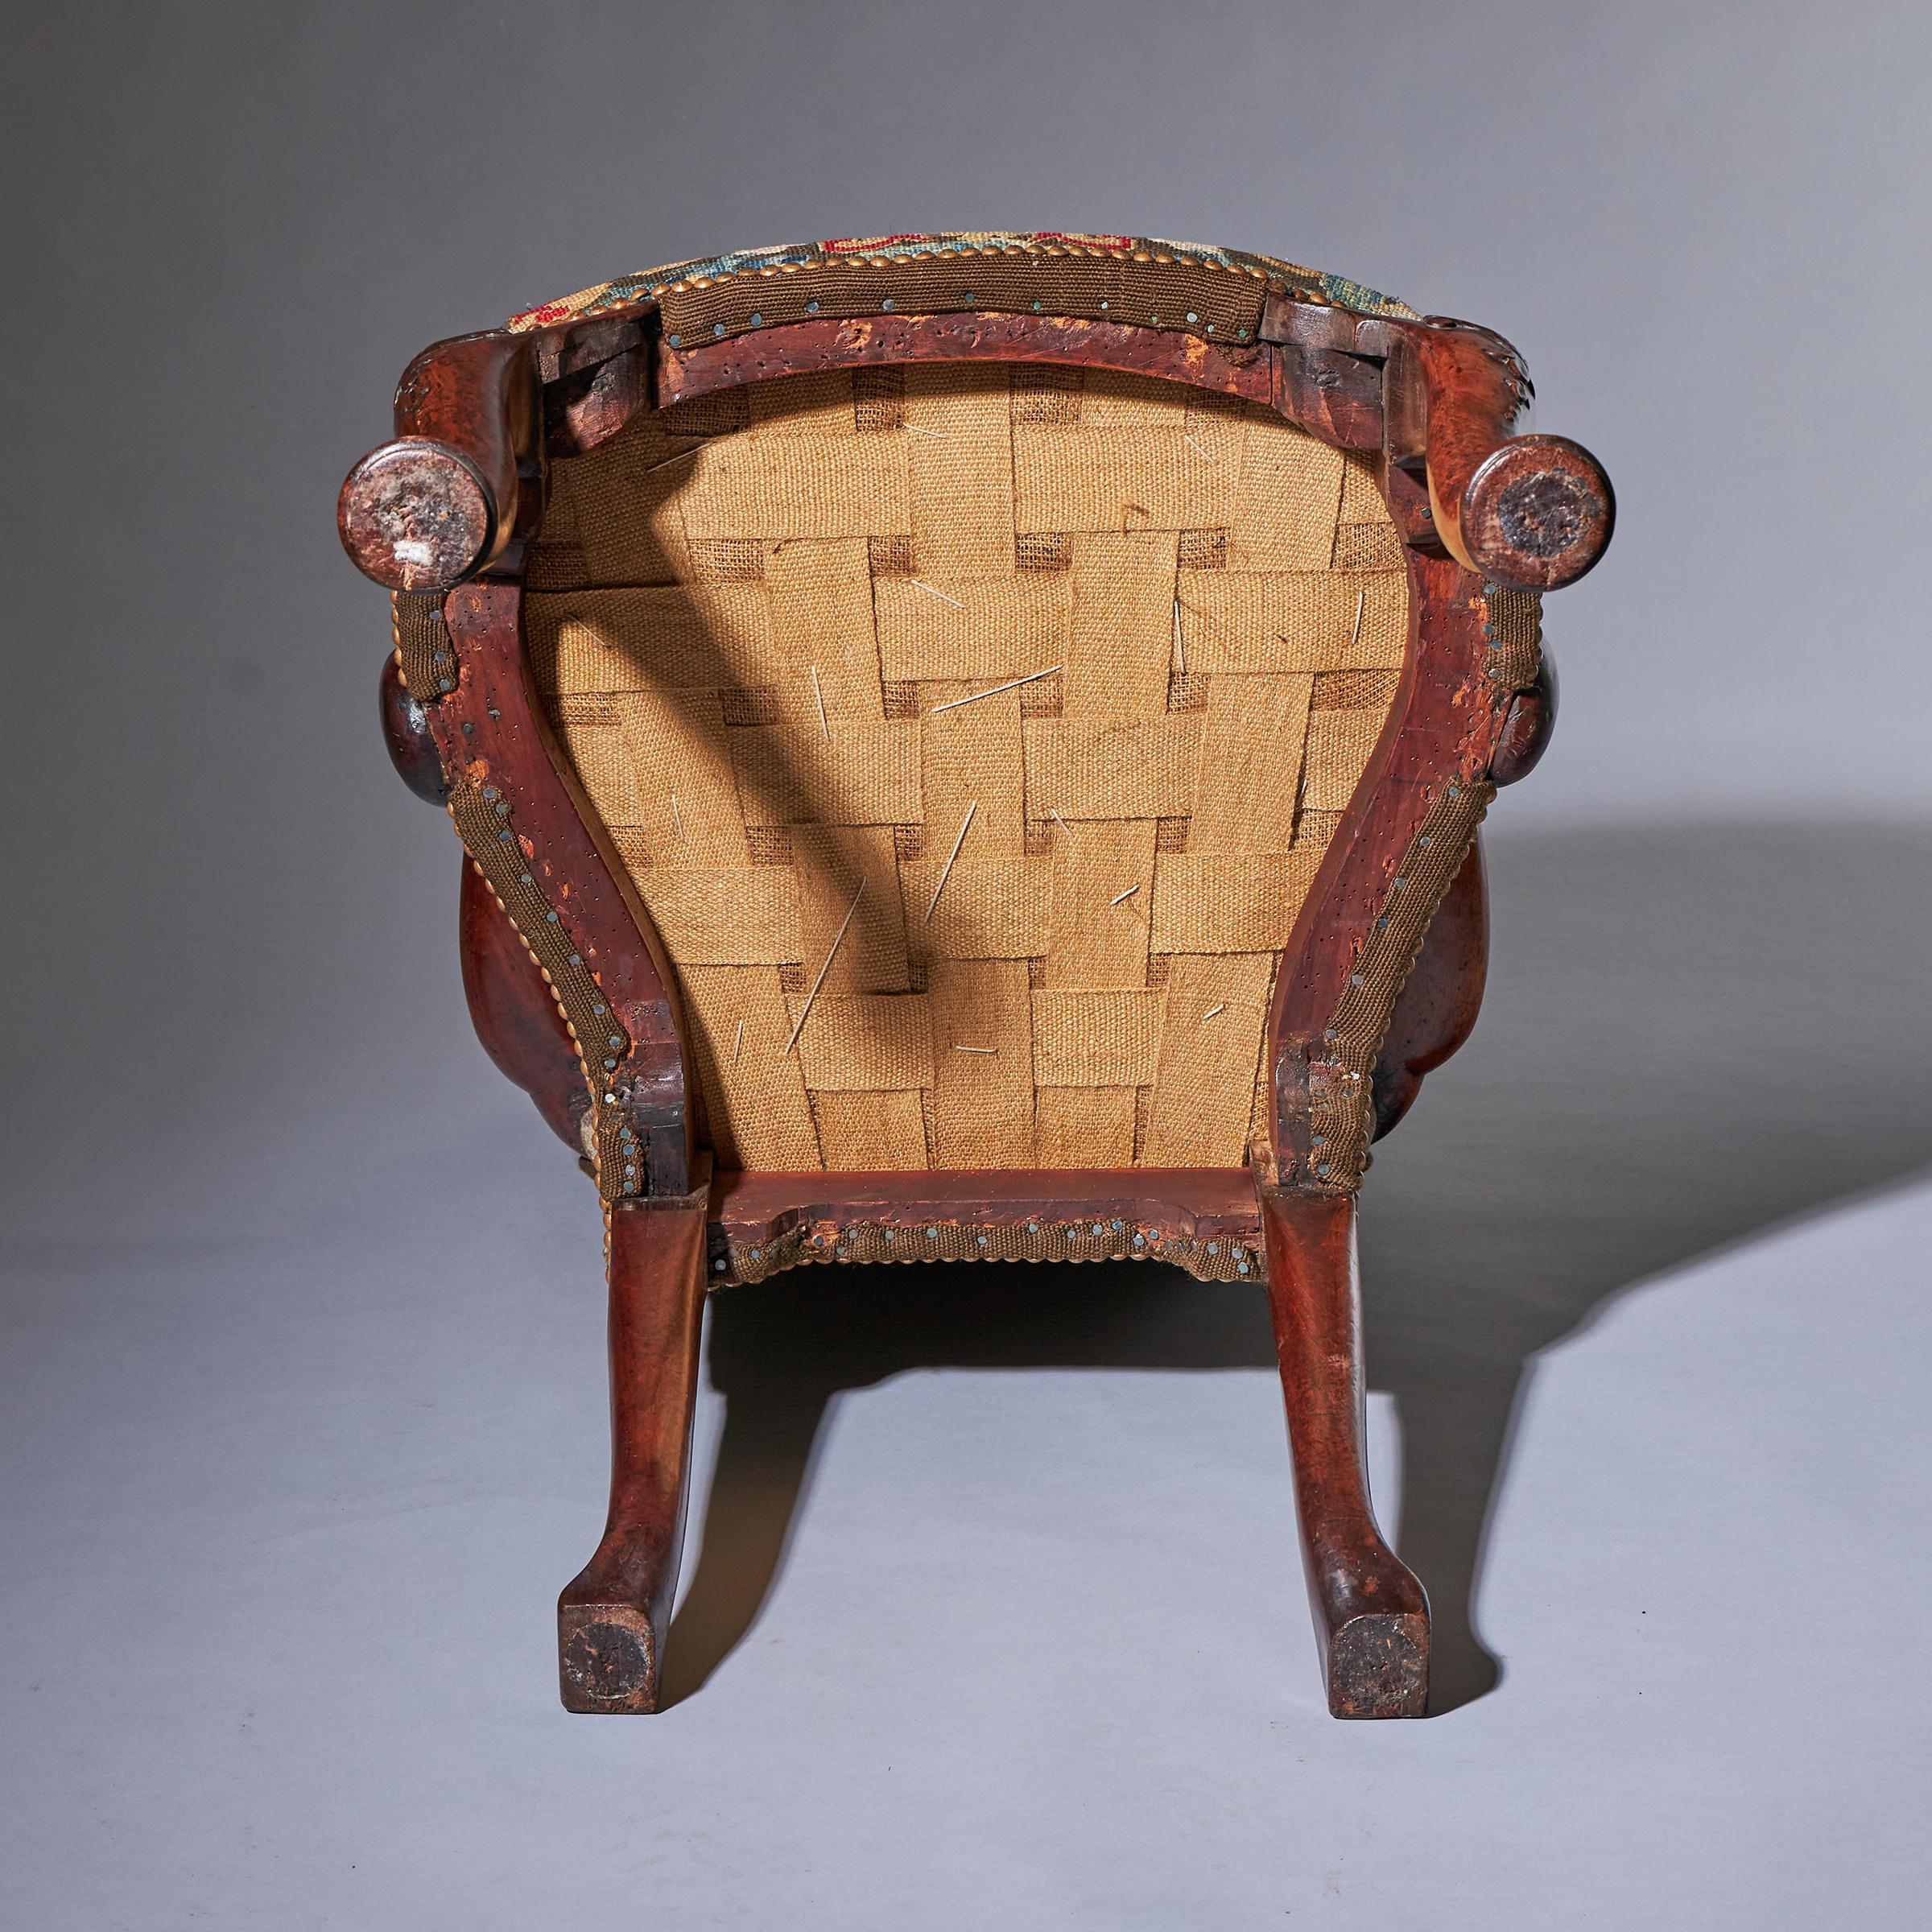 18th Century George I Walnut Shepherds Crook Armchair with Period Needlework For Sale 15